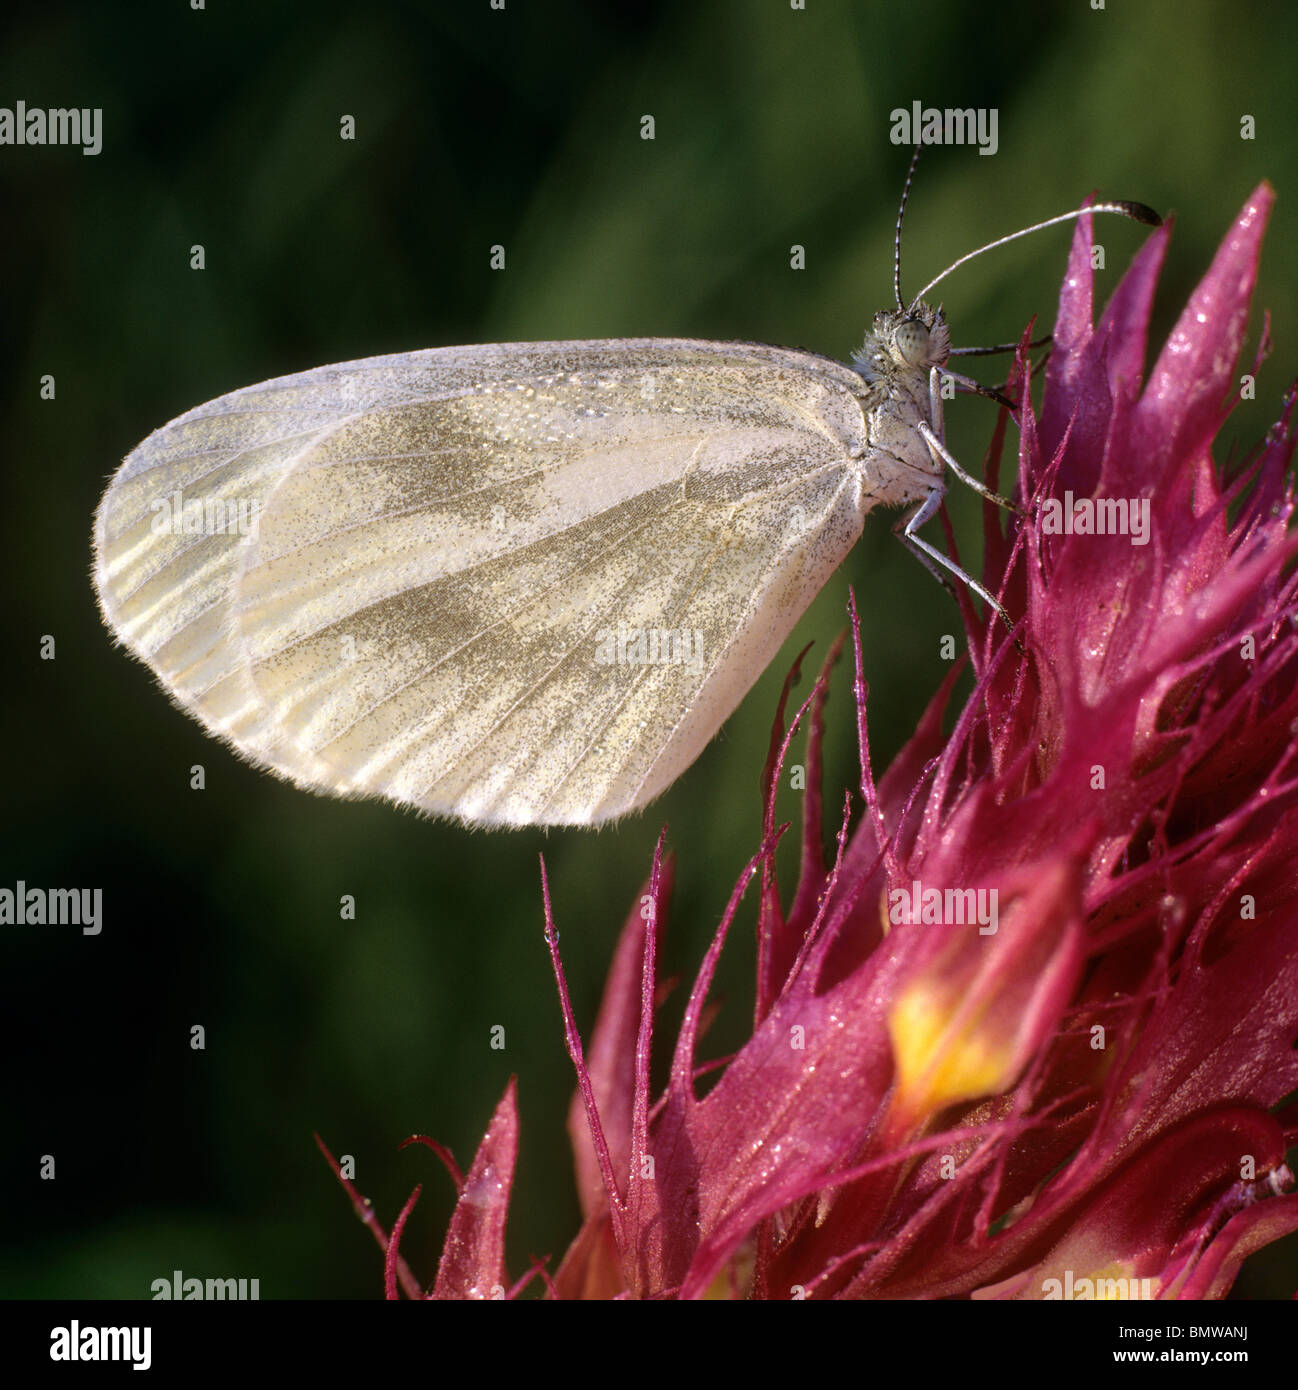 Wood White (Leptidea sinapis, Leptidea reali), butterfly on an inflorescence. Stock Photo